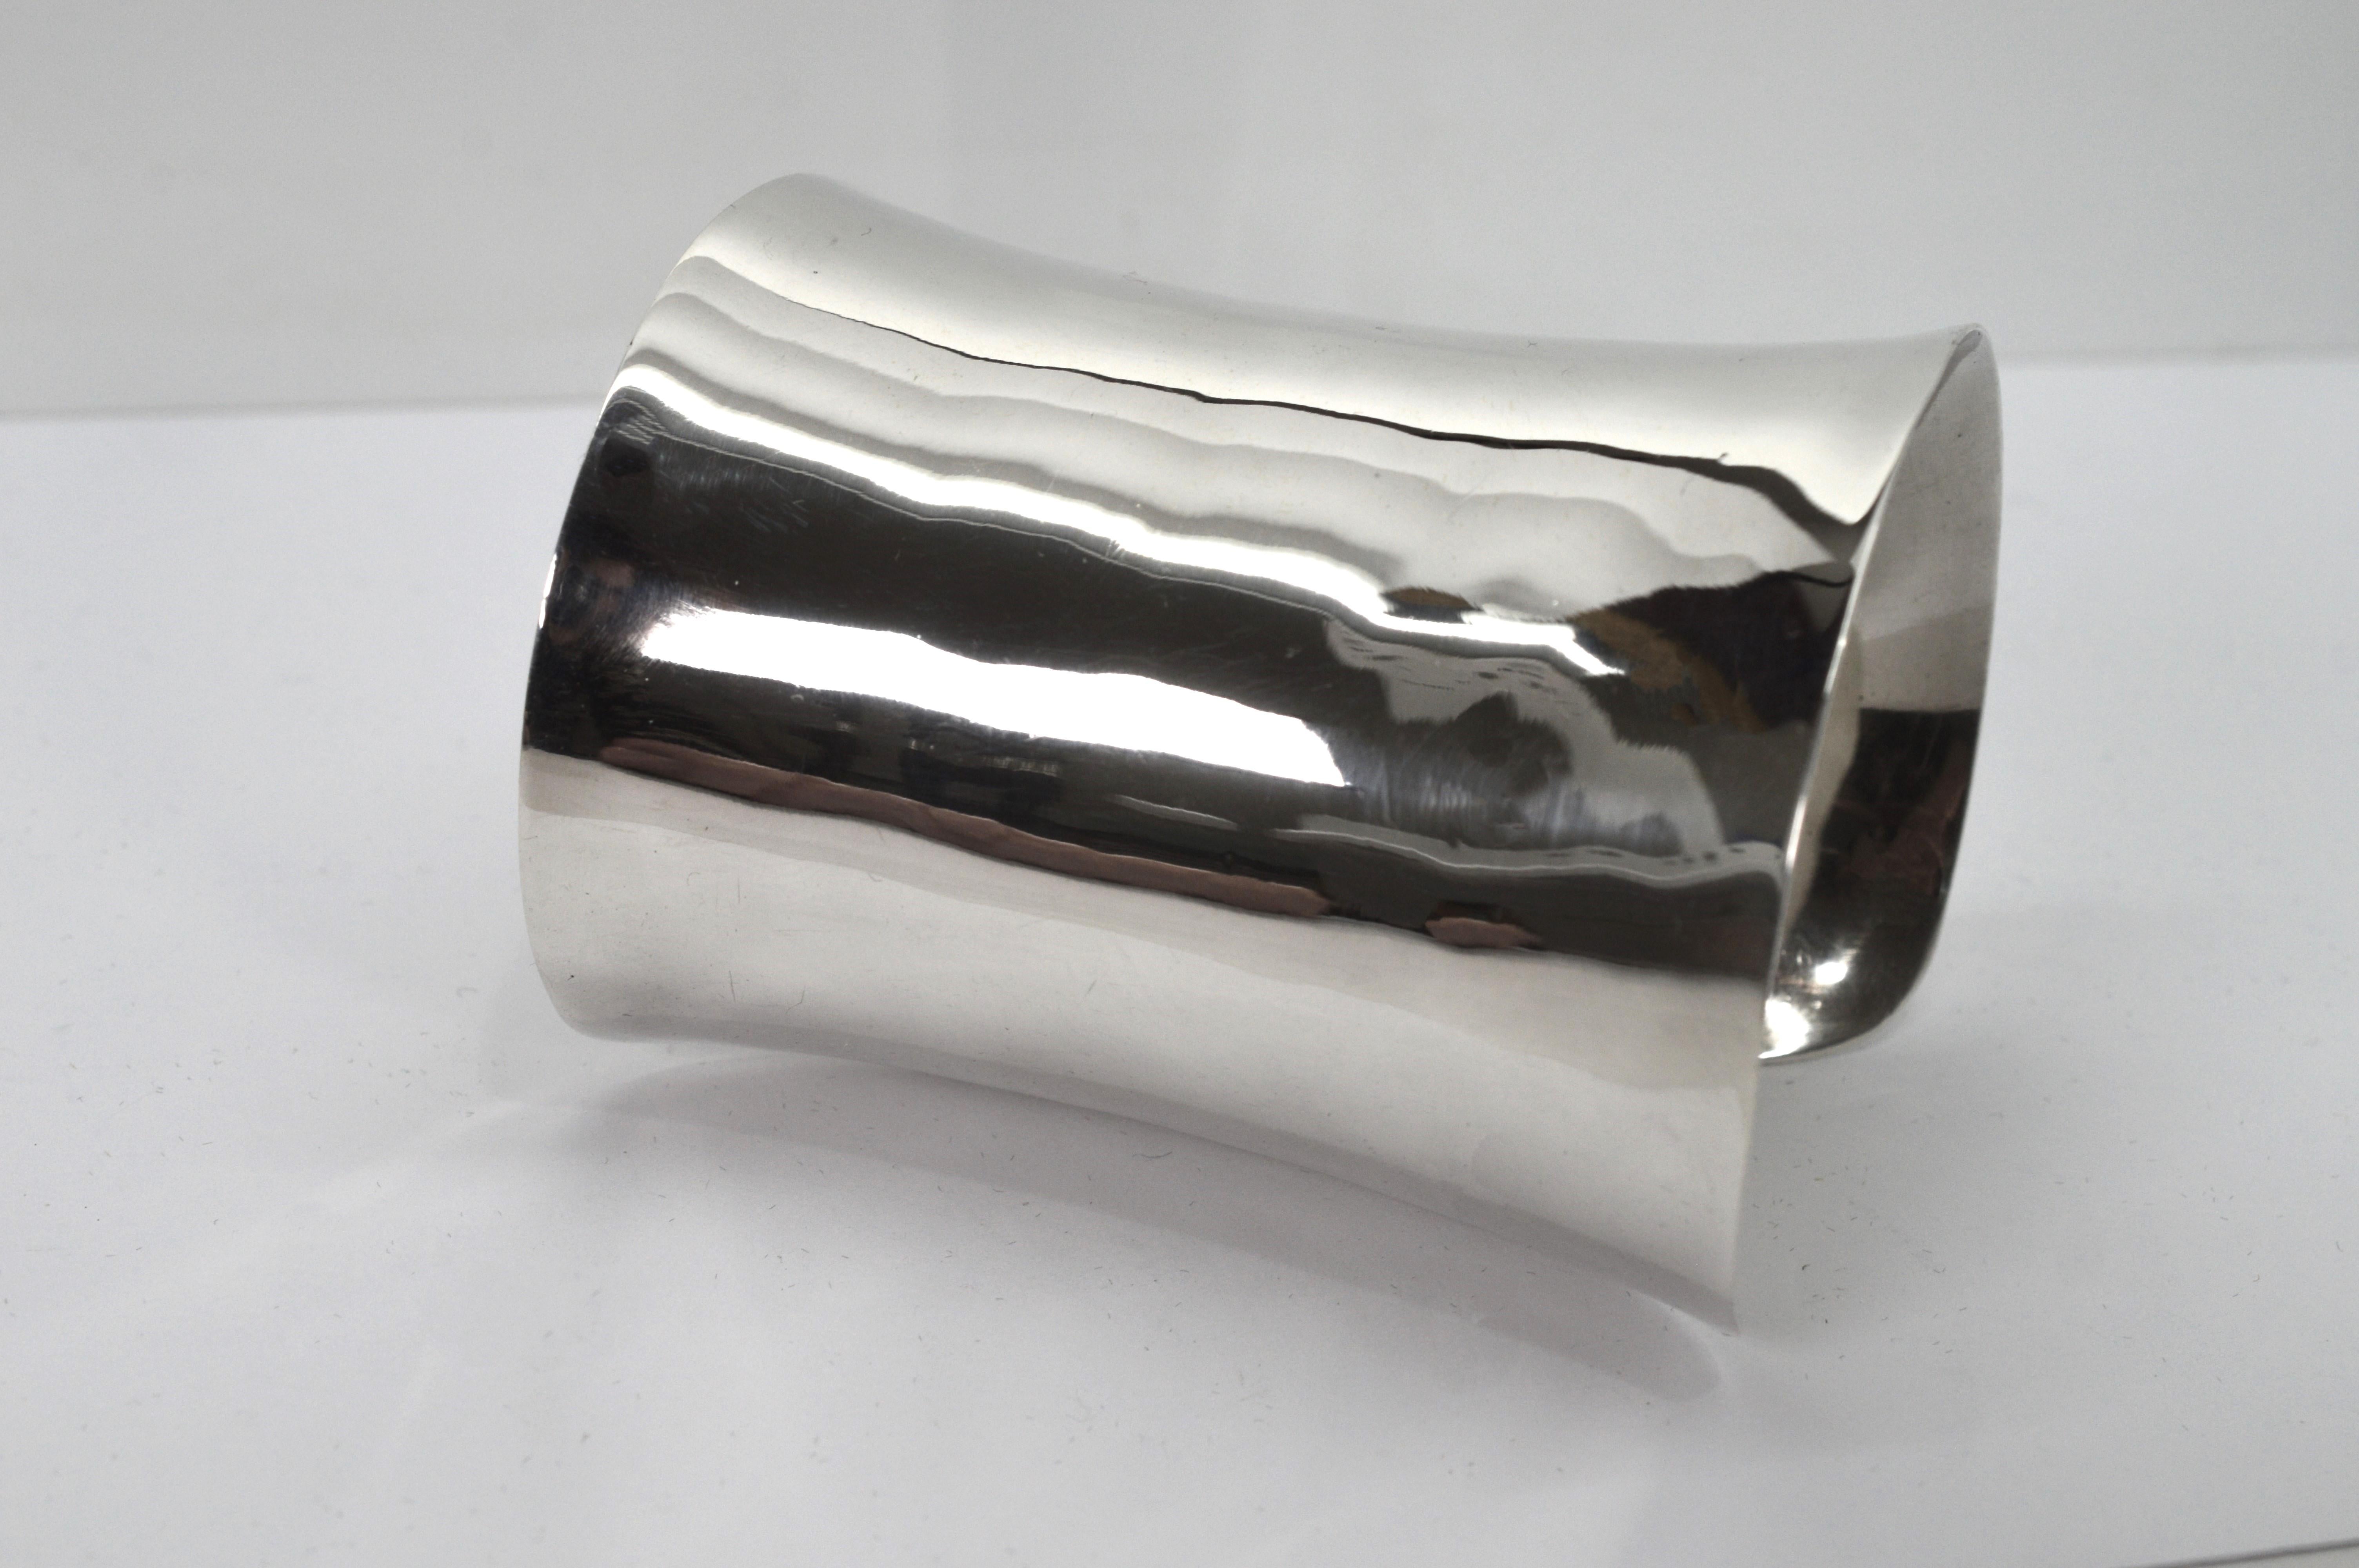 This fabulous high polished long cuff bracelet defines bold style. In sculpted sterling silver, the sleeve measures a generous three inches long and wraps the wrist with a modern contoured shaped 2-1/2 x 2 inches wide. The piece has some flex to